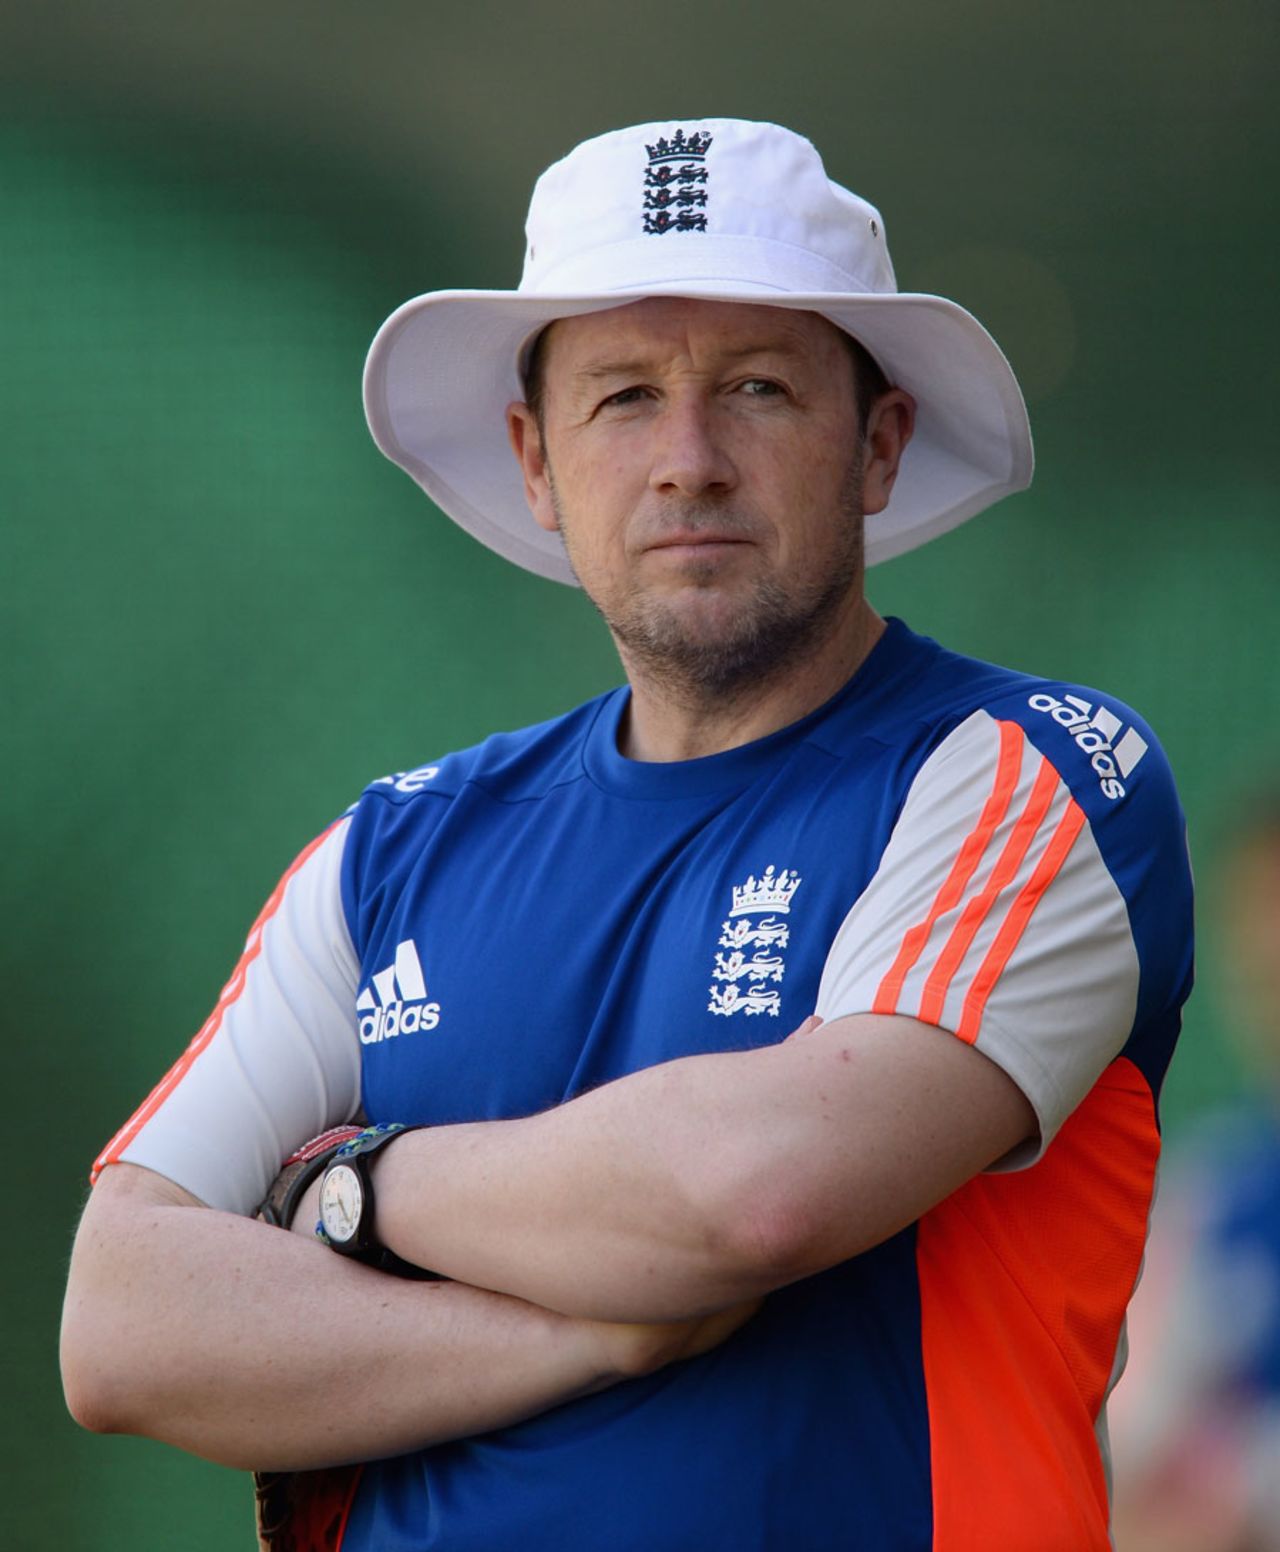 Robert Croft is working with England as a spin bowling consultant, Bloemfontein, February 1, 2016